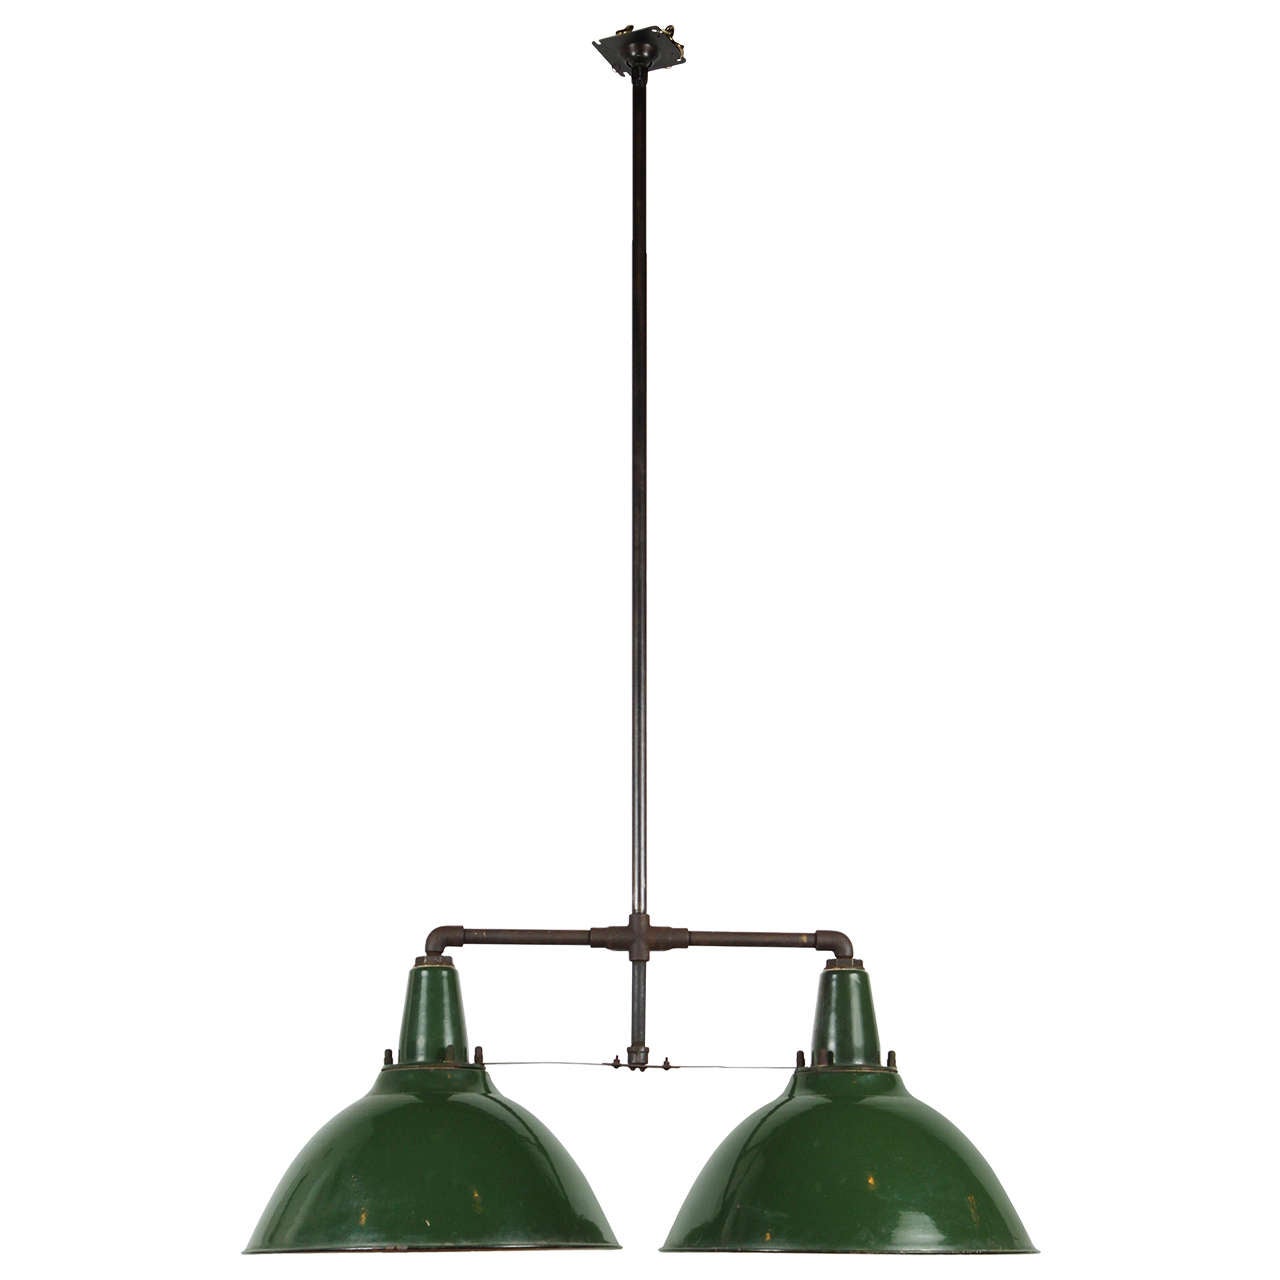 Double Enameled Industrial Light Fixture For Sale